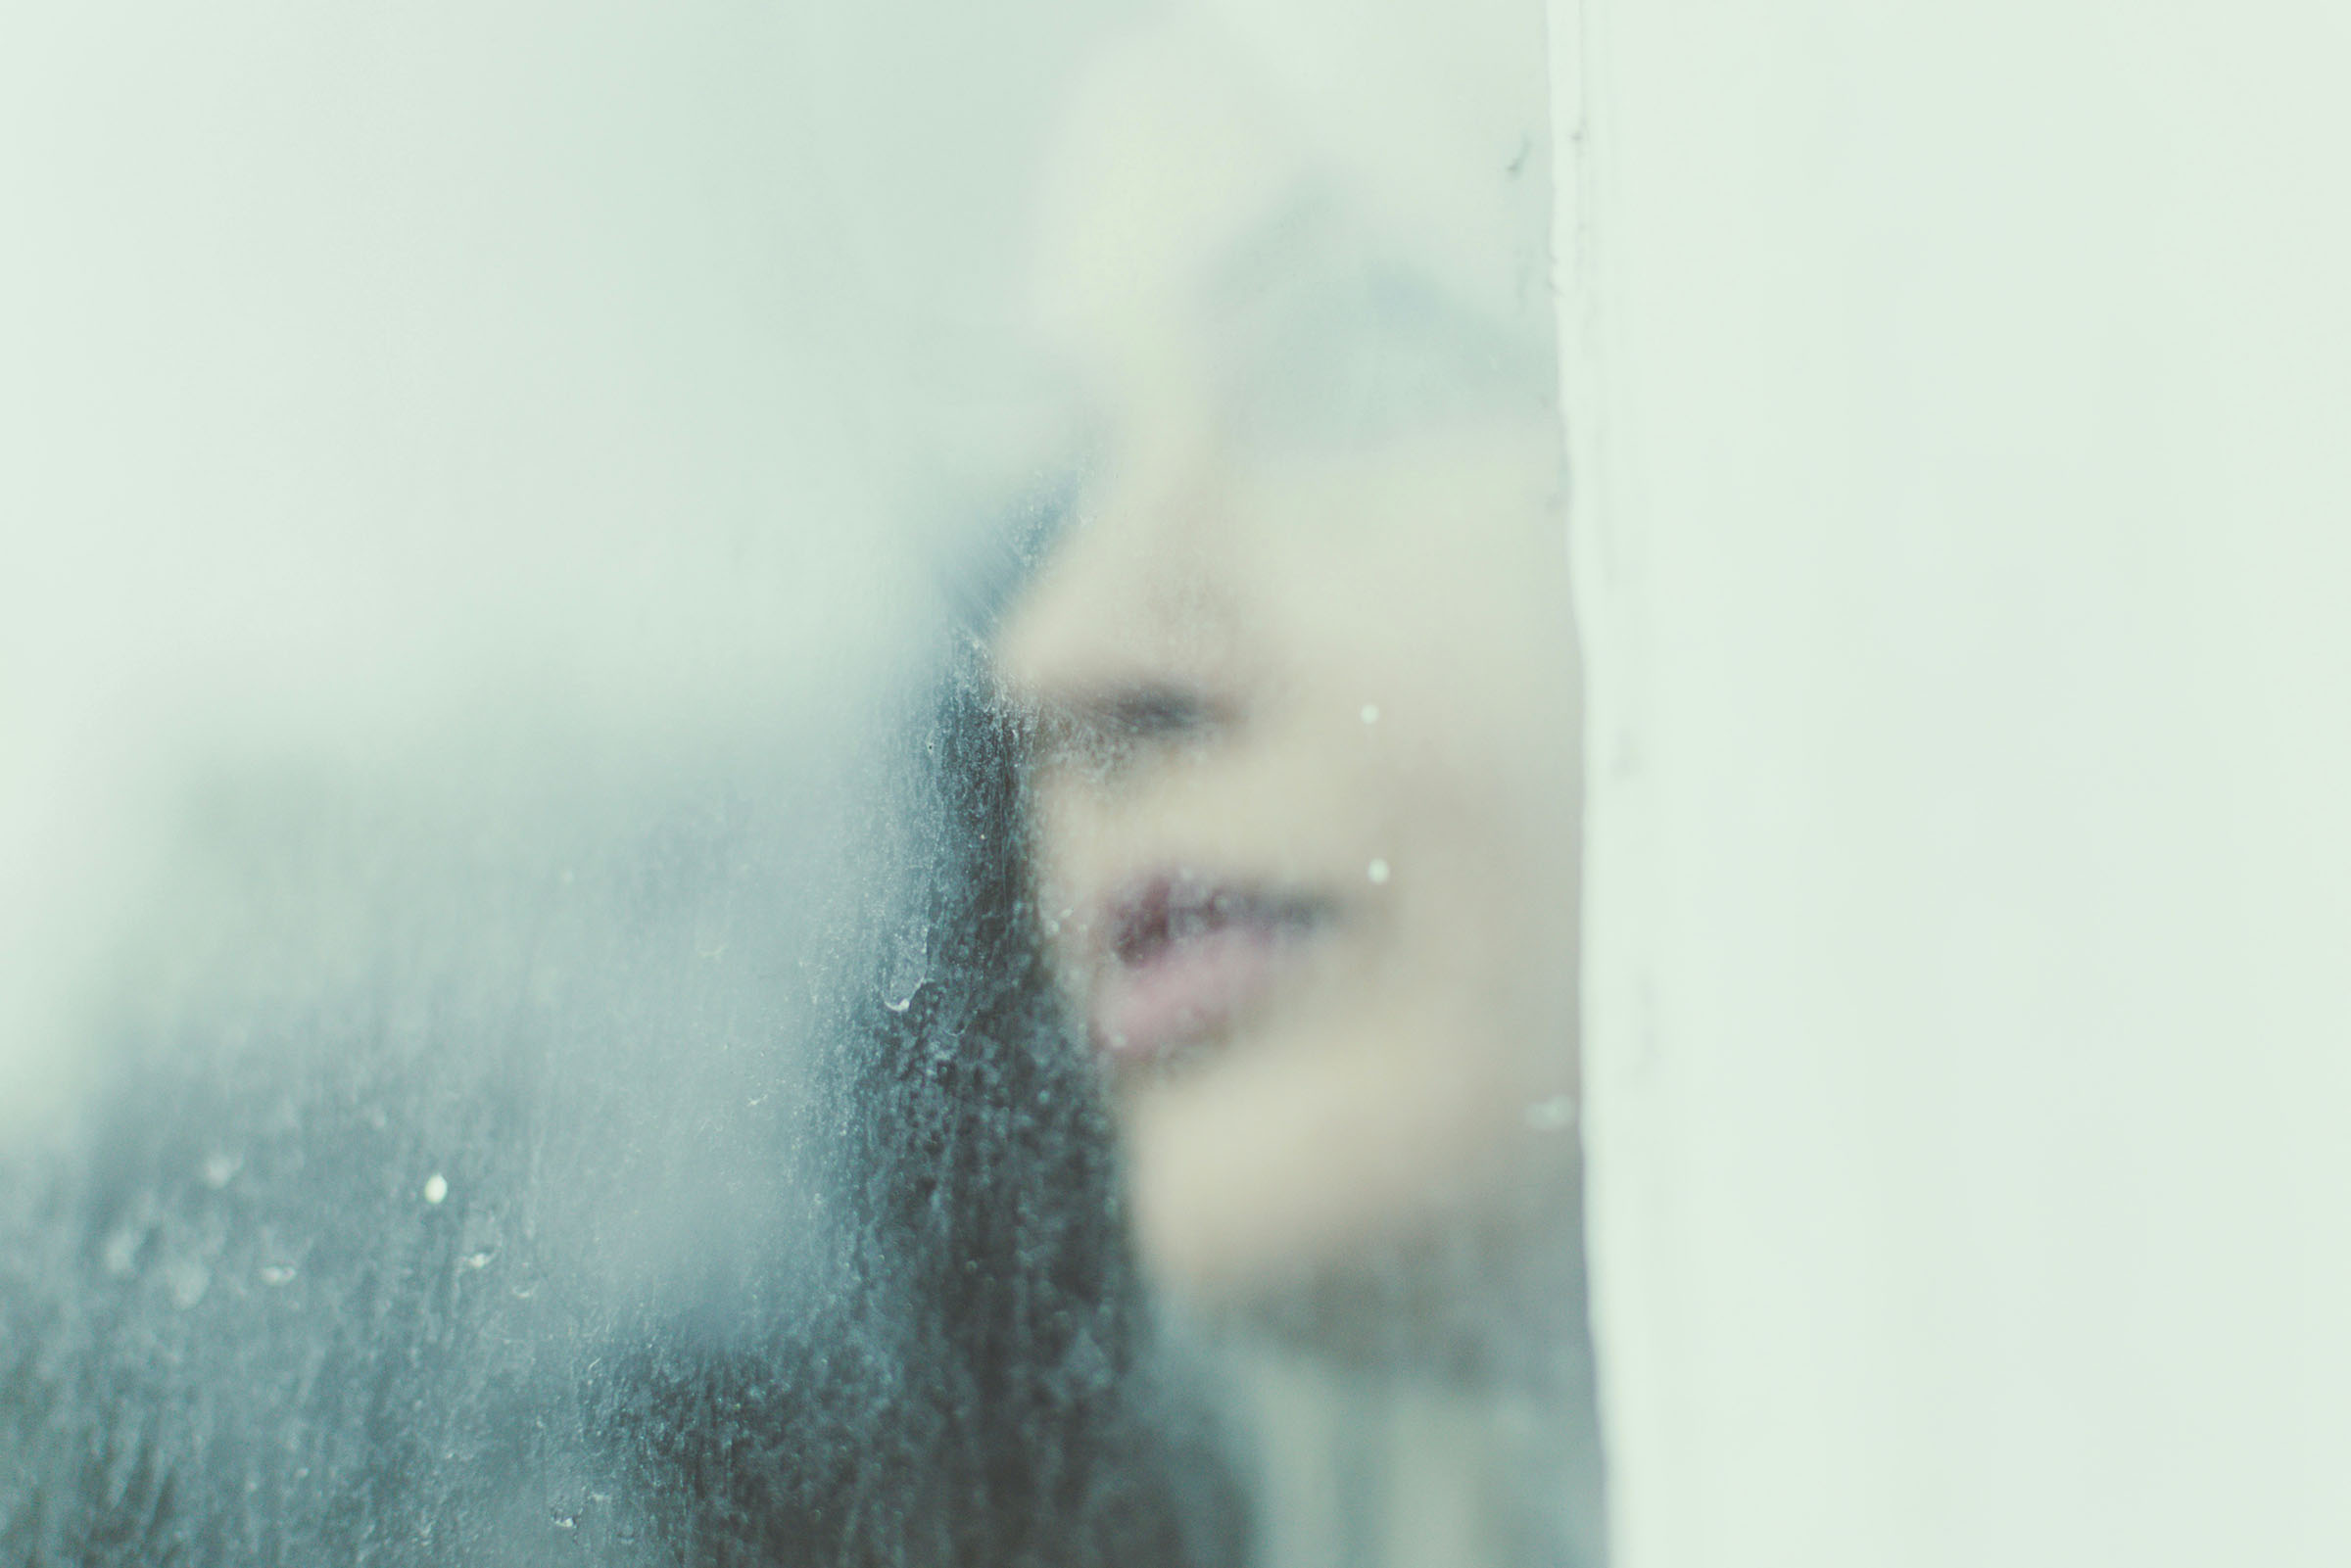 Woman looking out window